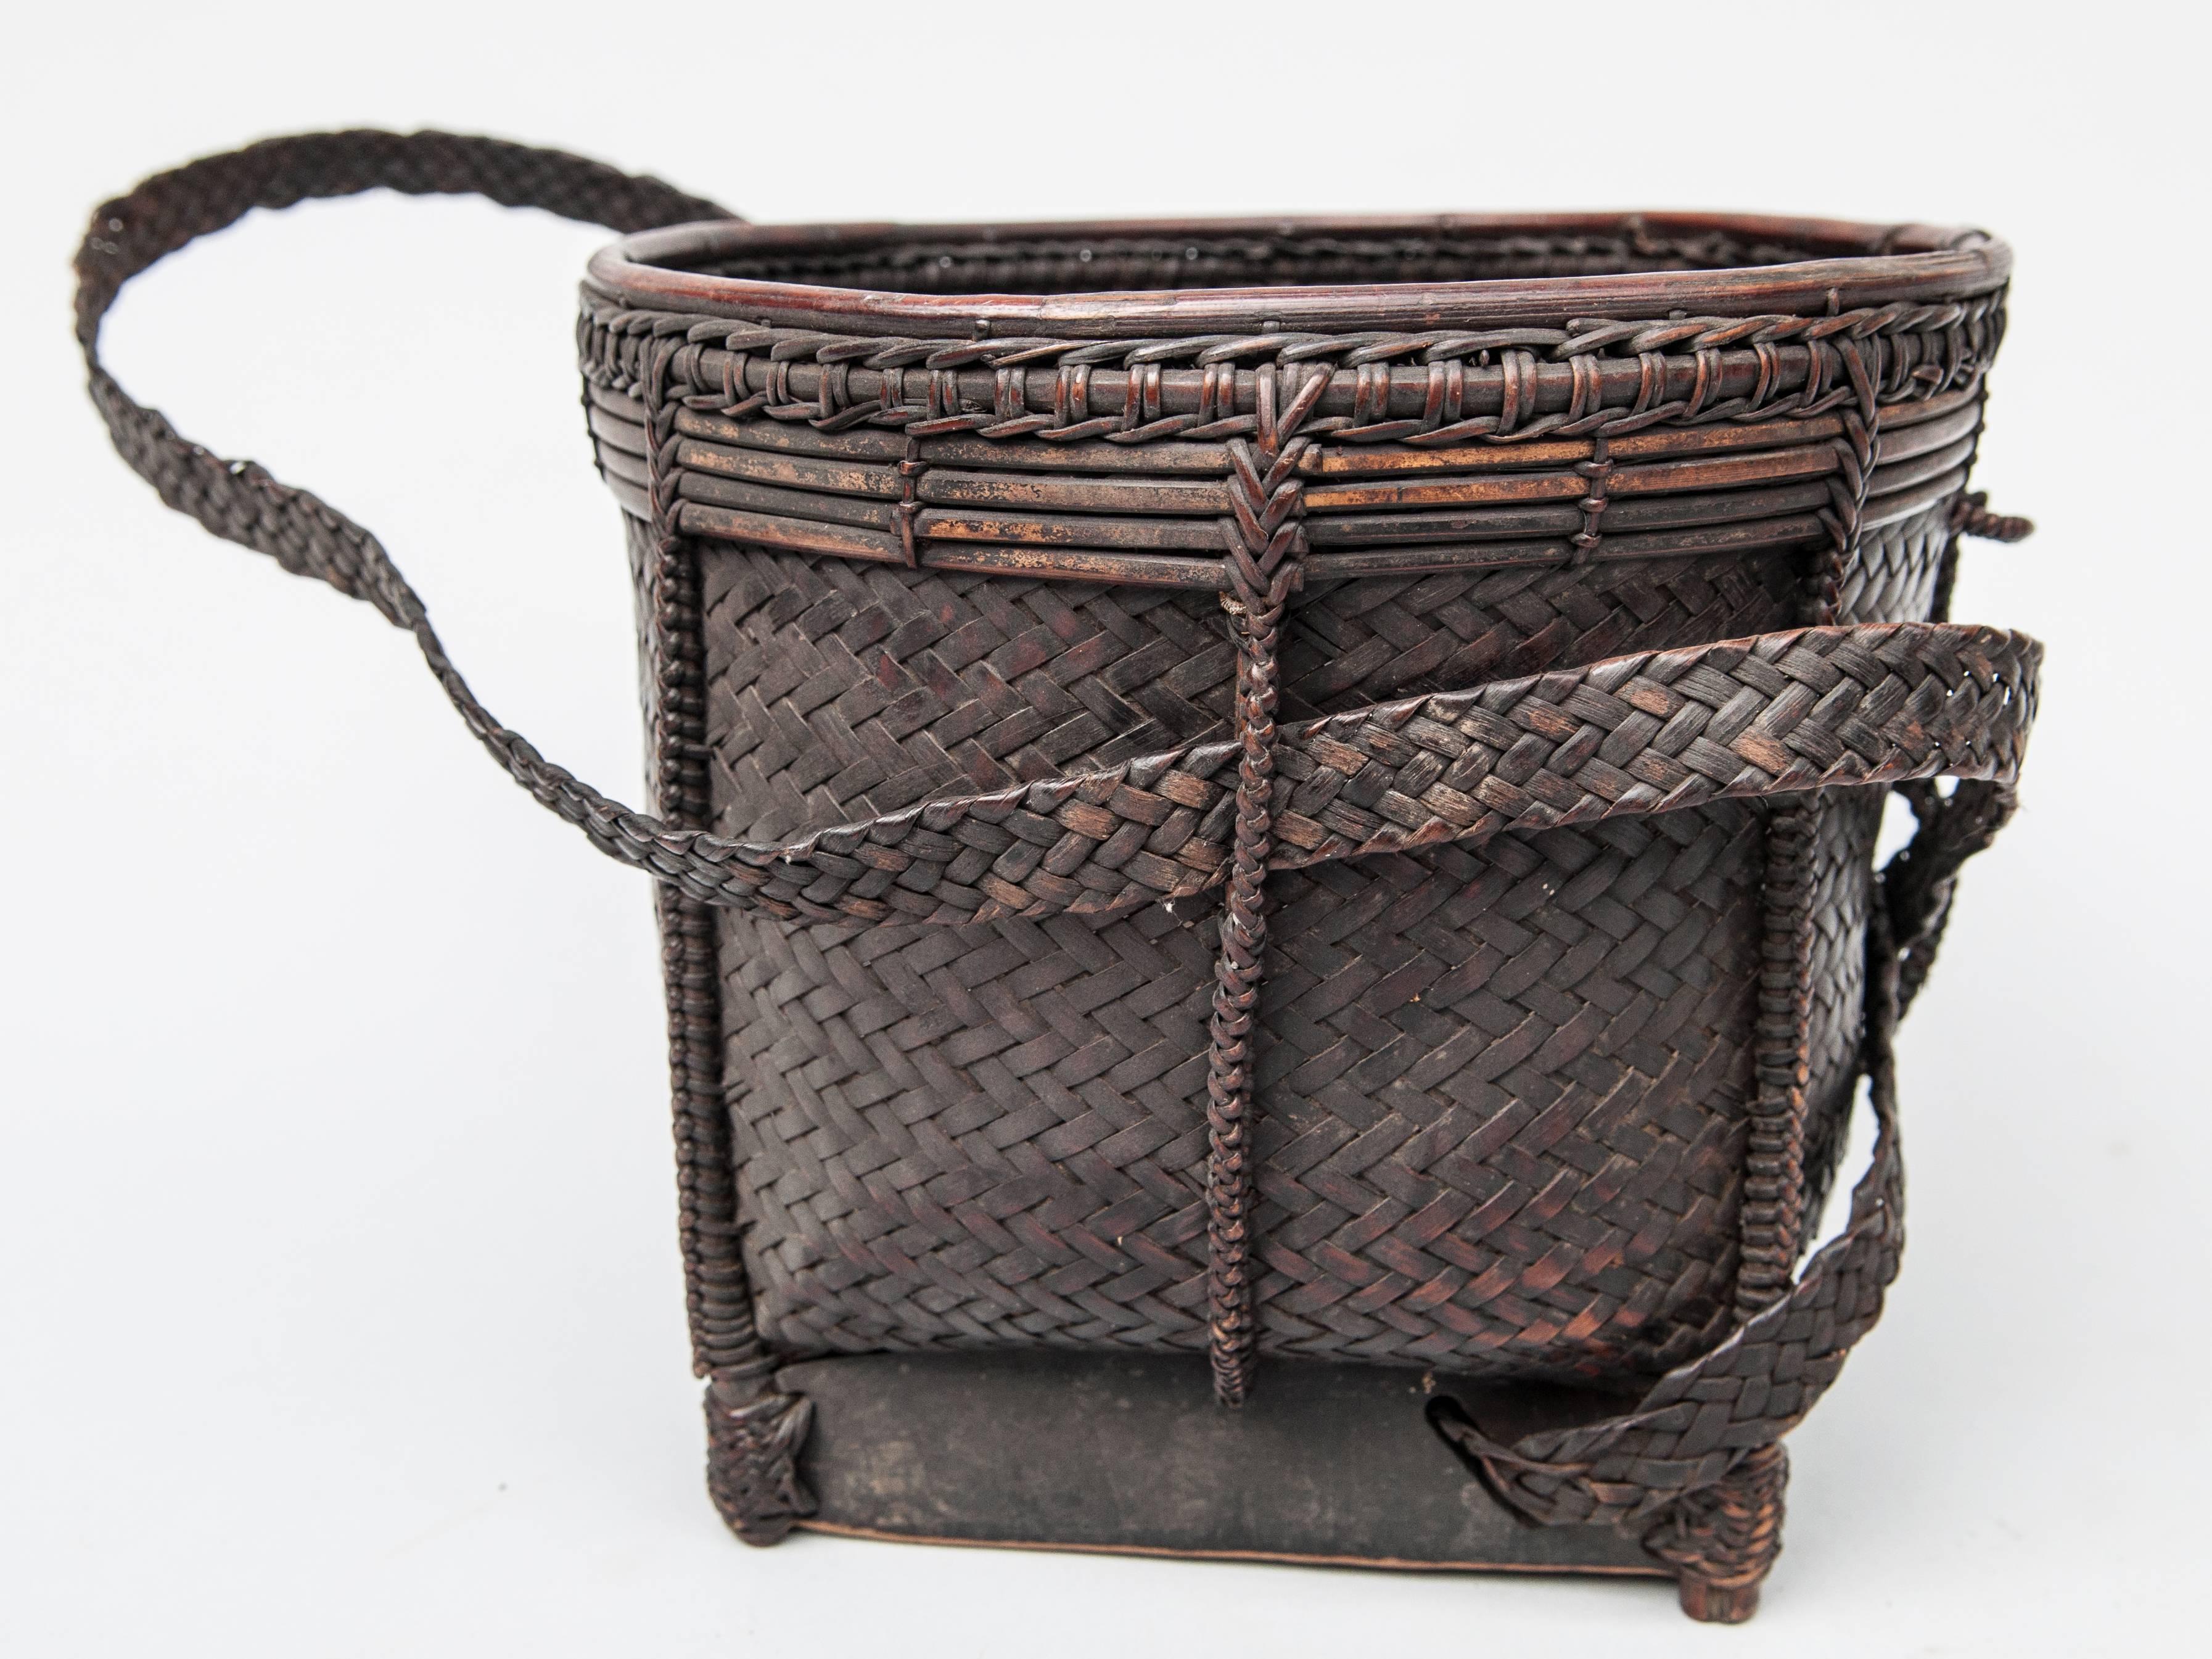 Collecting Basket from Ata Pue area of Laos. Mid-20th Century. Bamboo, Rattan.
Offered by Bo Tree Source.
Finely woven coffee collecting basket from the Ata Pue area of Laos. Mid-20th century. Laotians are widely renowned for the high quality of